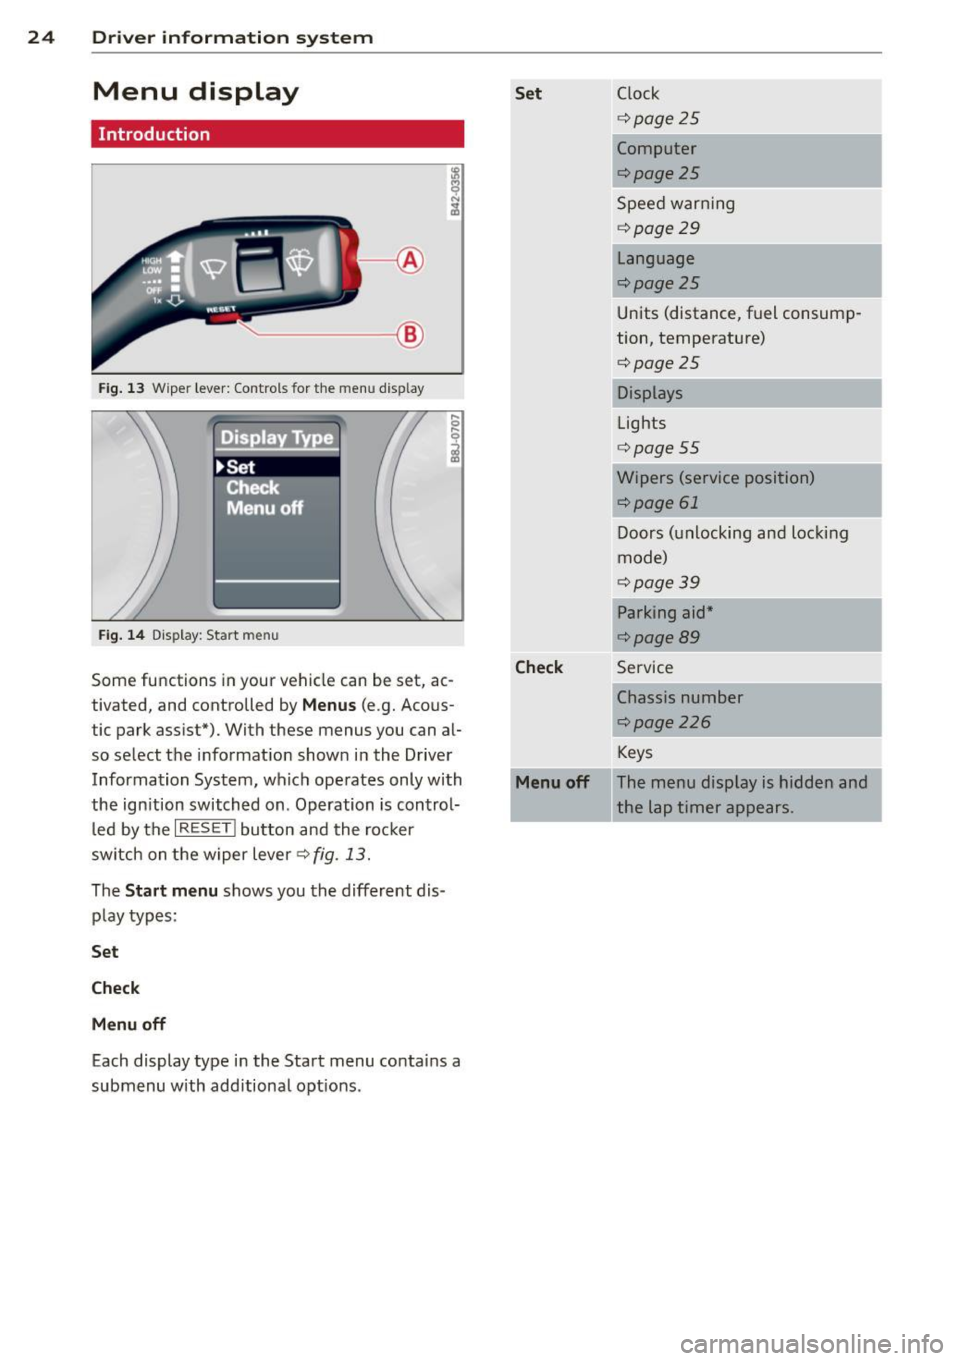 AUDI R8 SPYDER 2011  Owners Manual 24  Driver  information  system 
Menu display 
Introduction 
.____ __  ® 
Fig. 13 Wiper  lever: Controls  for  the  men u disp lay 
.  Displa  Type 
~Set 
!: Cfiecl< --, 
Menu  off 
Fig. 14 Display: 